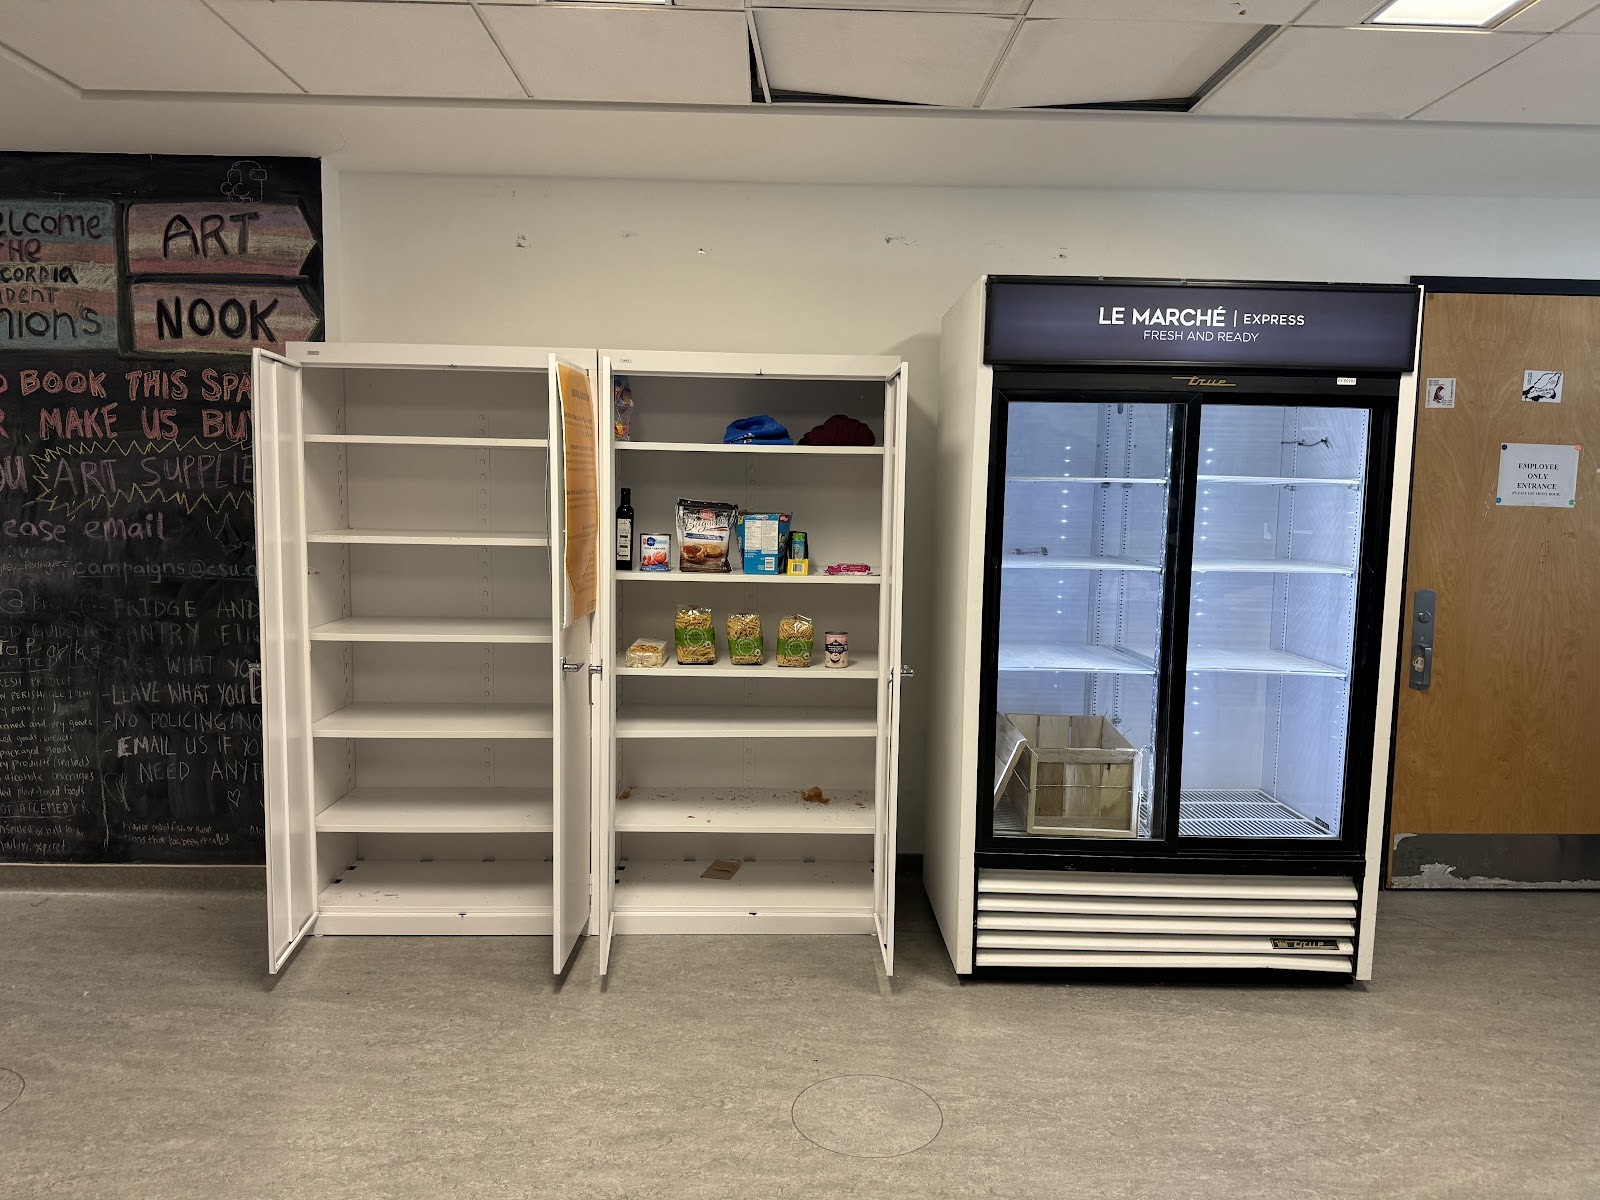 Two tall, white cabinets with the doors open to reveal some groceries like pasta and snacks on the shelves. To the right, there is an empty fridge.